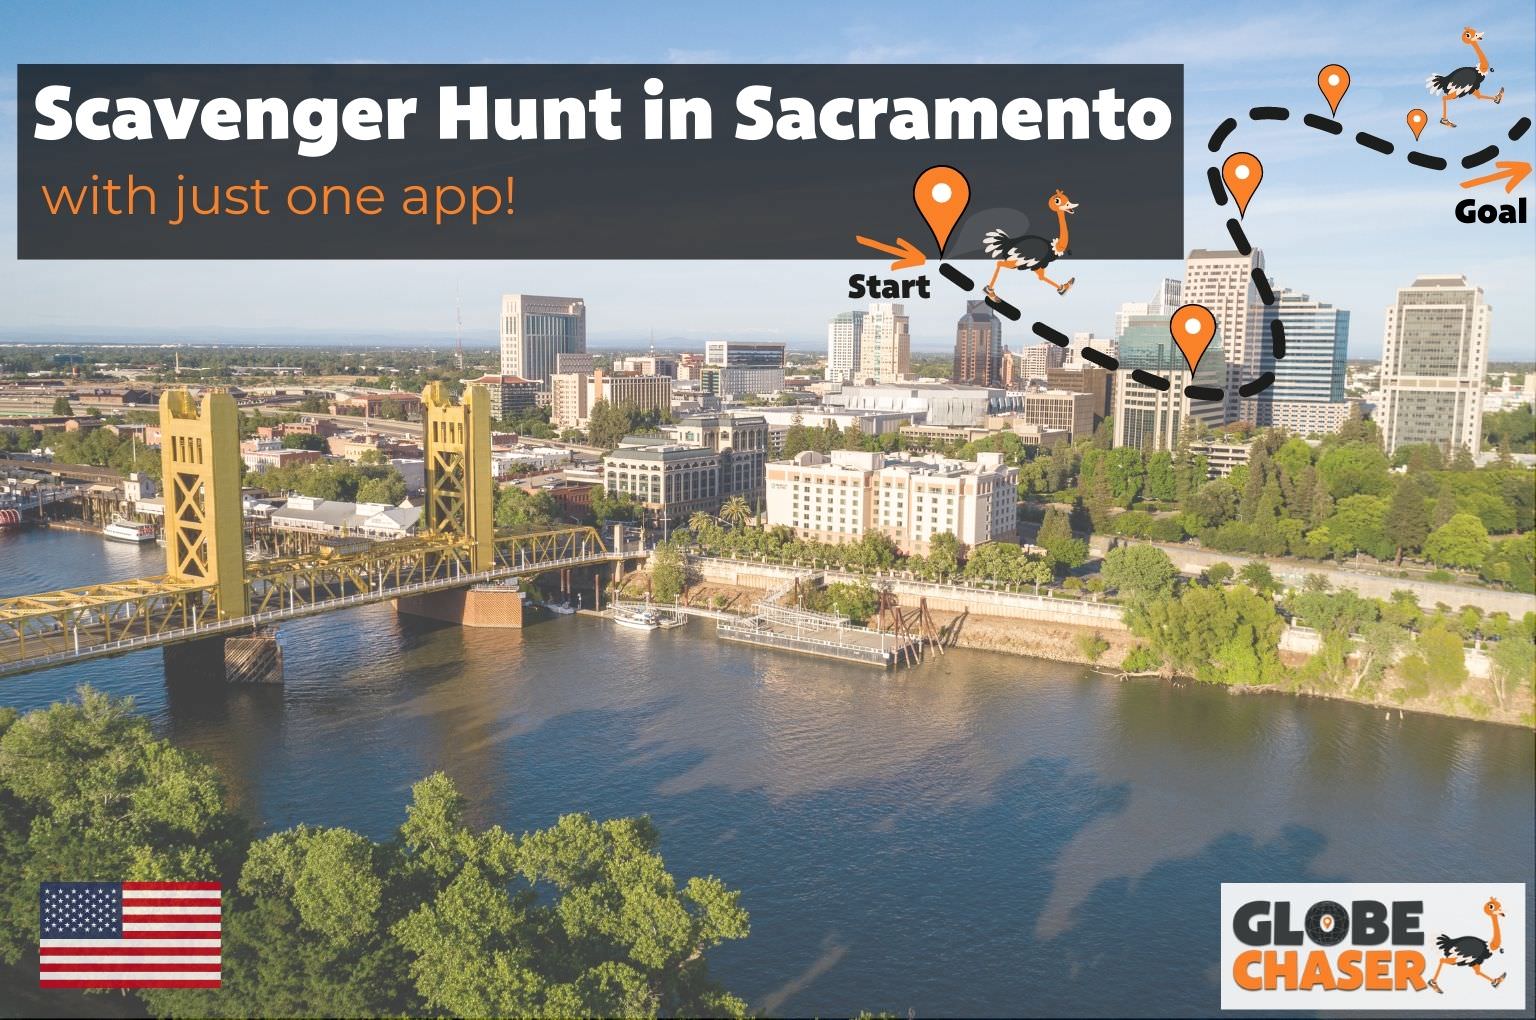 Scavenger Hunt in Sacramento, USA - Family Activities with the Globe Chaser App for Outdoor Fun